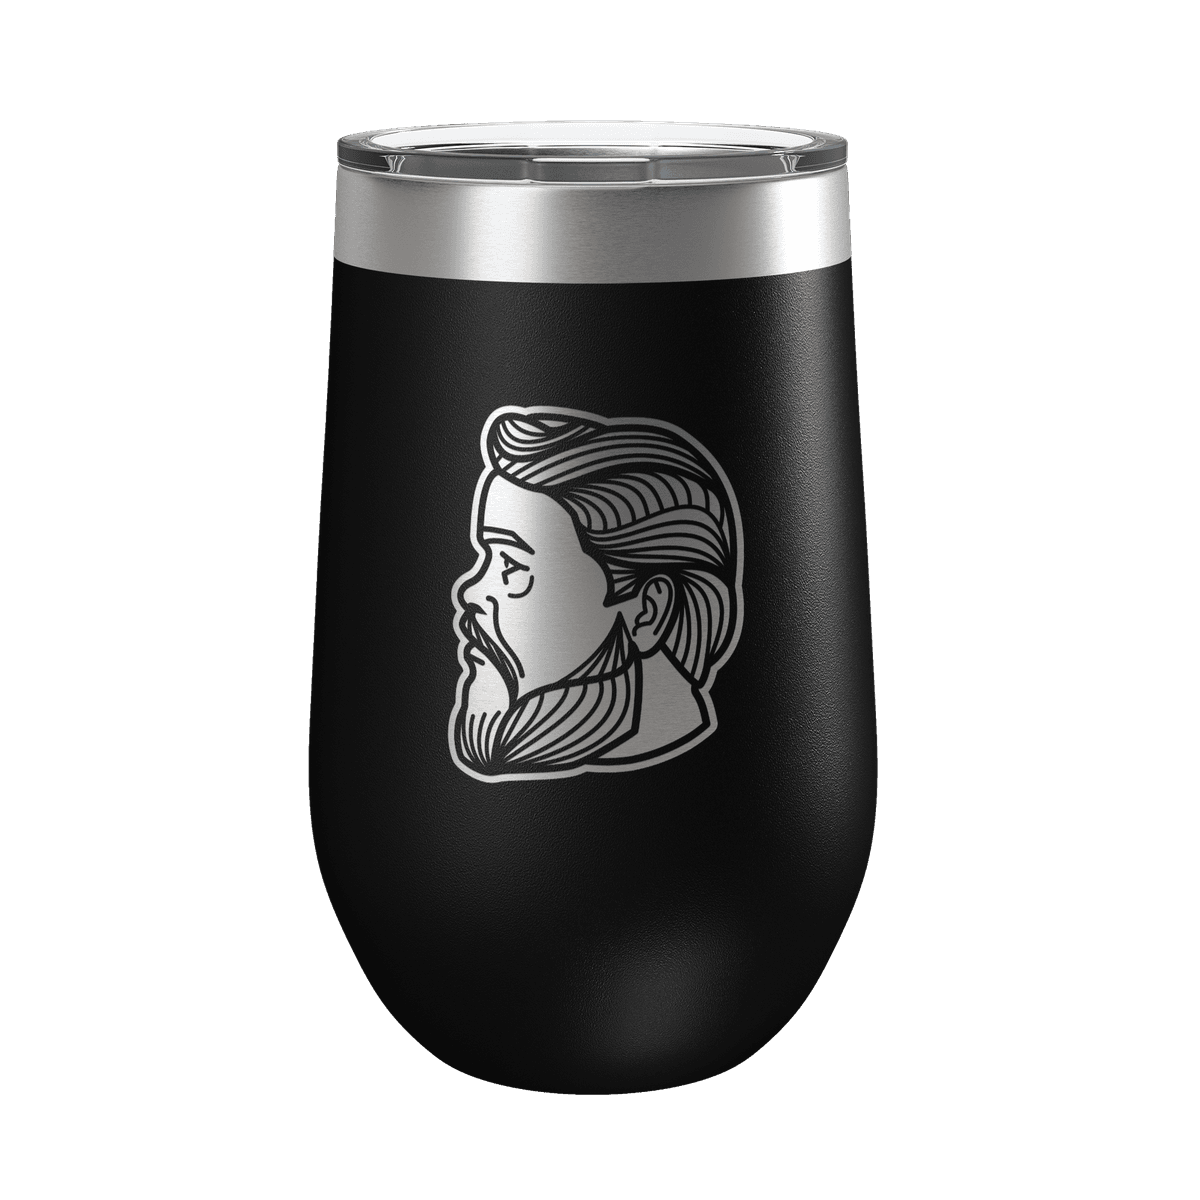 https://d11xh0uby8avni.cloudfront.net/fit-in/0x1200/products/SPUR08-tumbler16-black.png